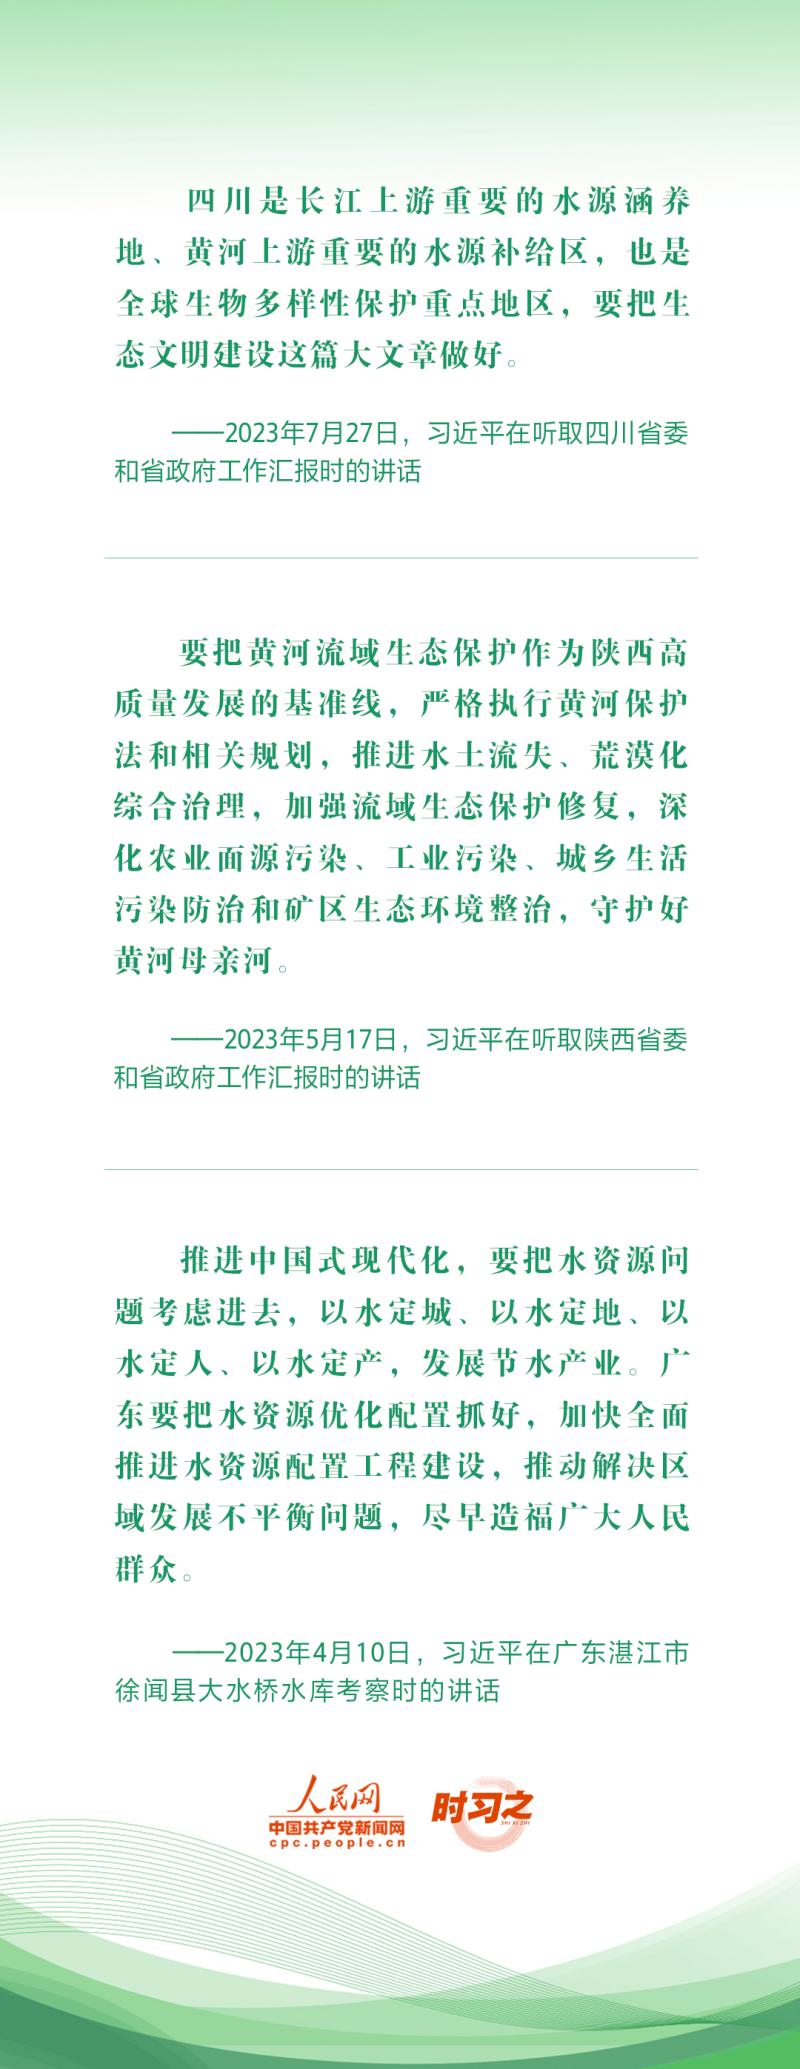 Green Water and Green Mountains Reflecting Initial Heart General Secretary's Heart of "Green China" General Secretary's Heart of "Green China"-Exclusive Manuscript | Green Water and Green Mountains Reflecting Initial Heart |